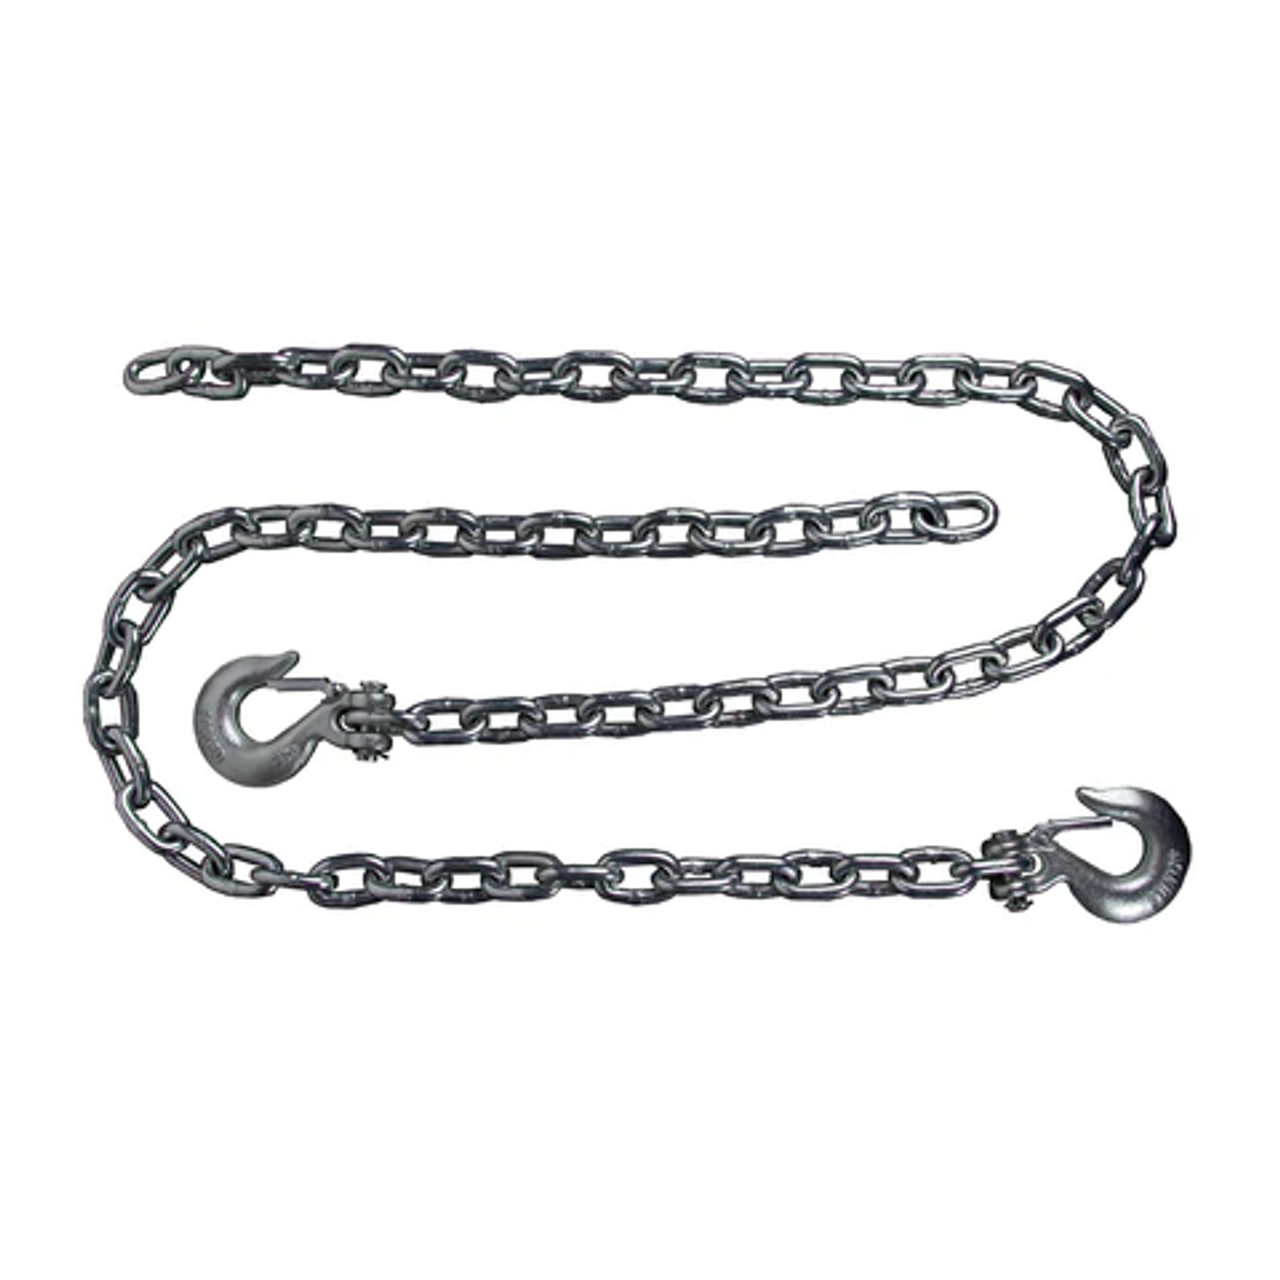 BULLETPROOF SAFETY CHAINS - HEAVY DUTY Main View